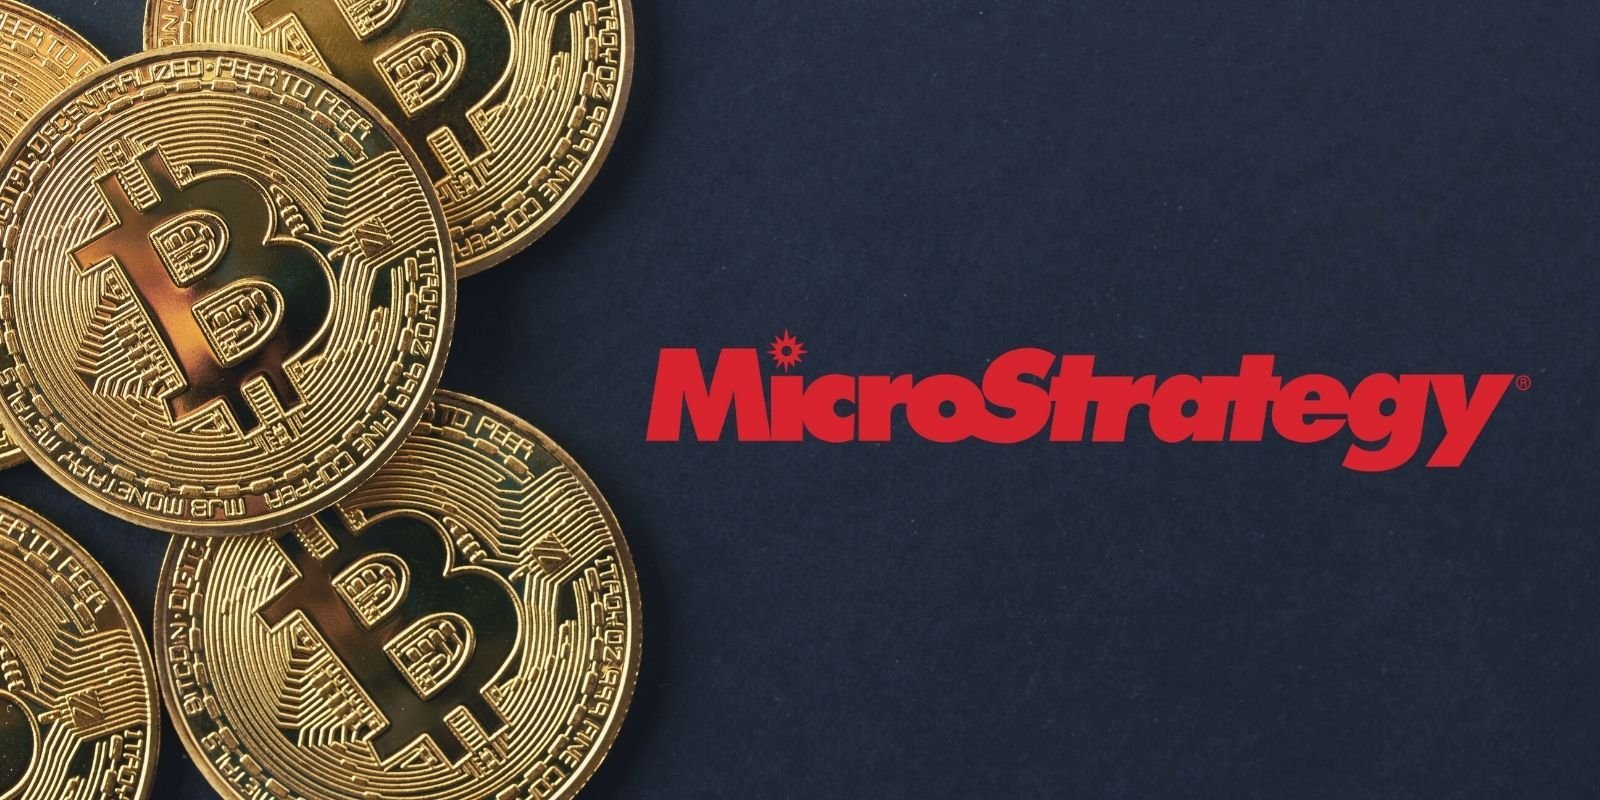 how many bitcoins does microstrategy own